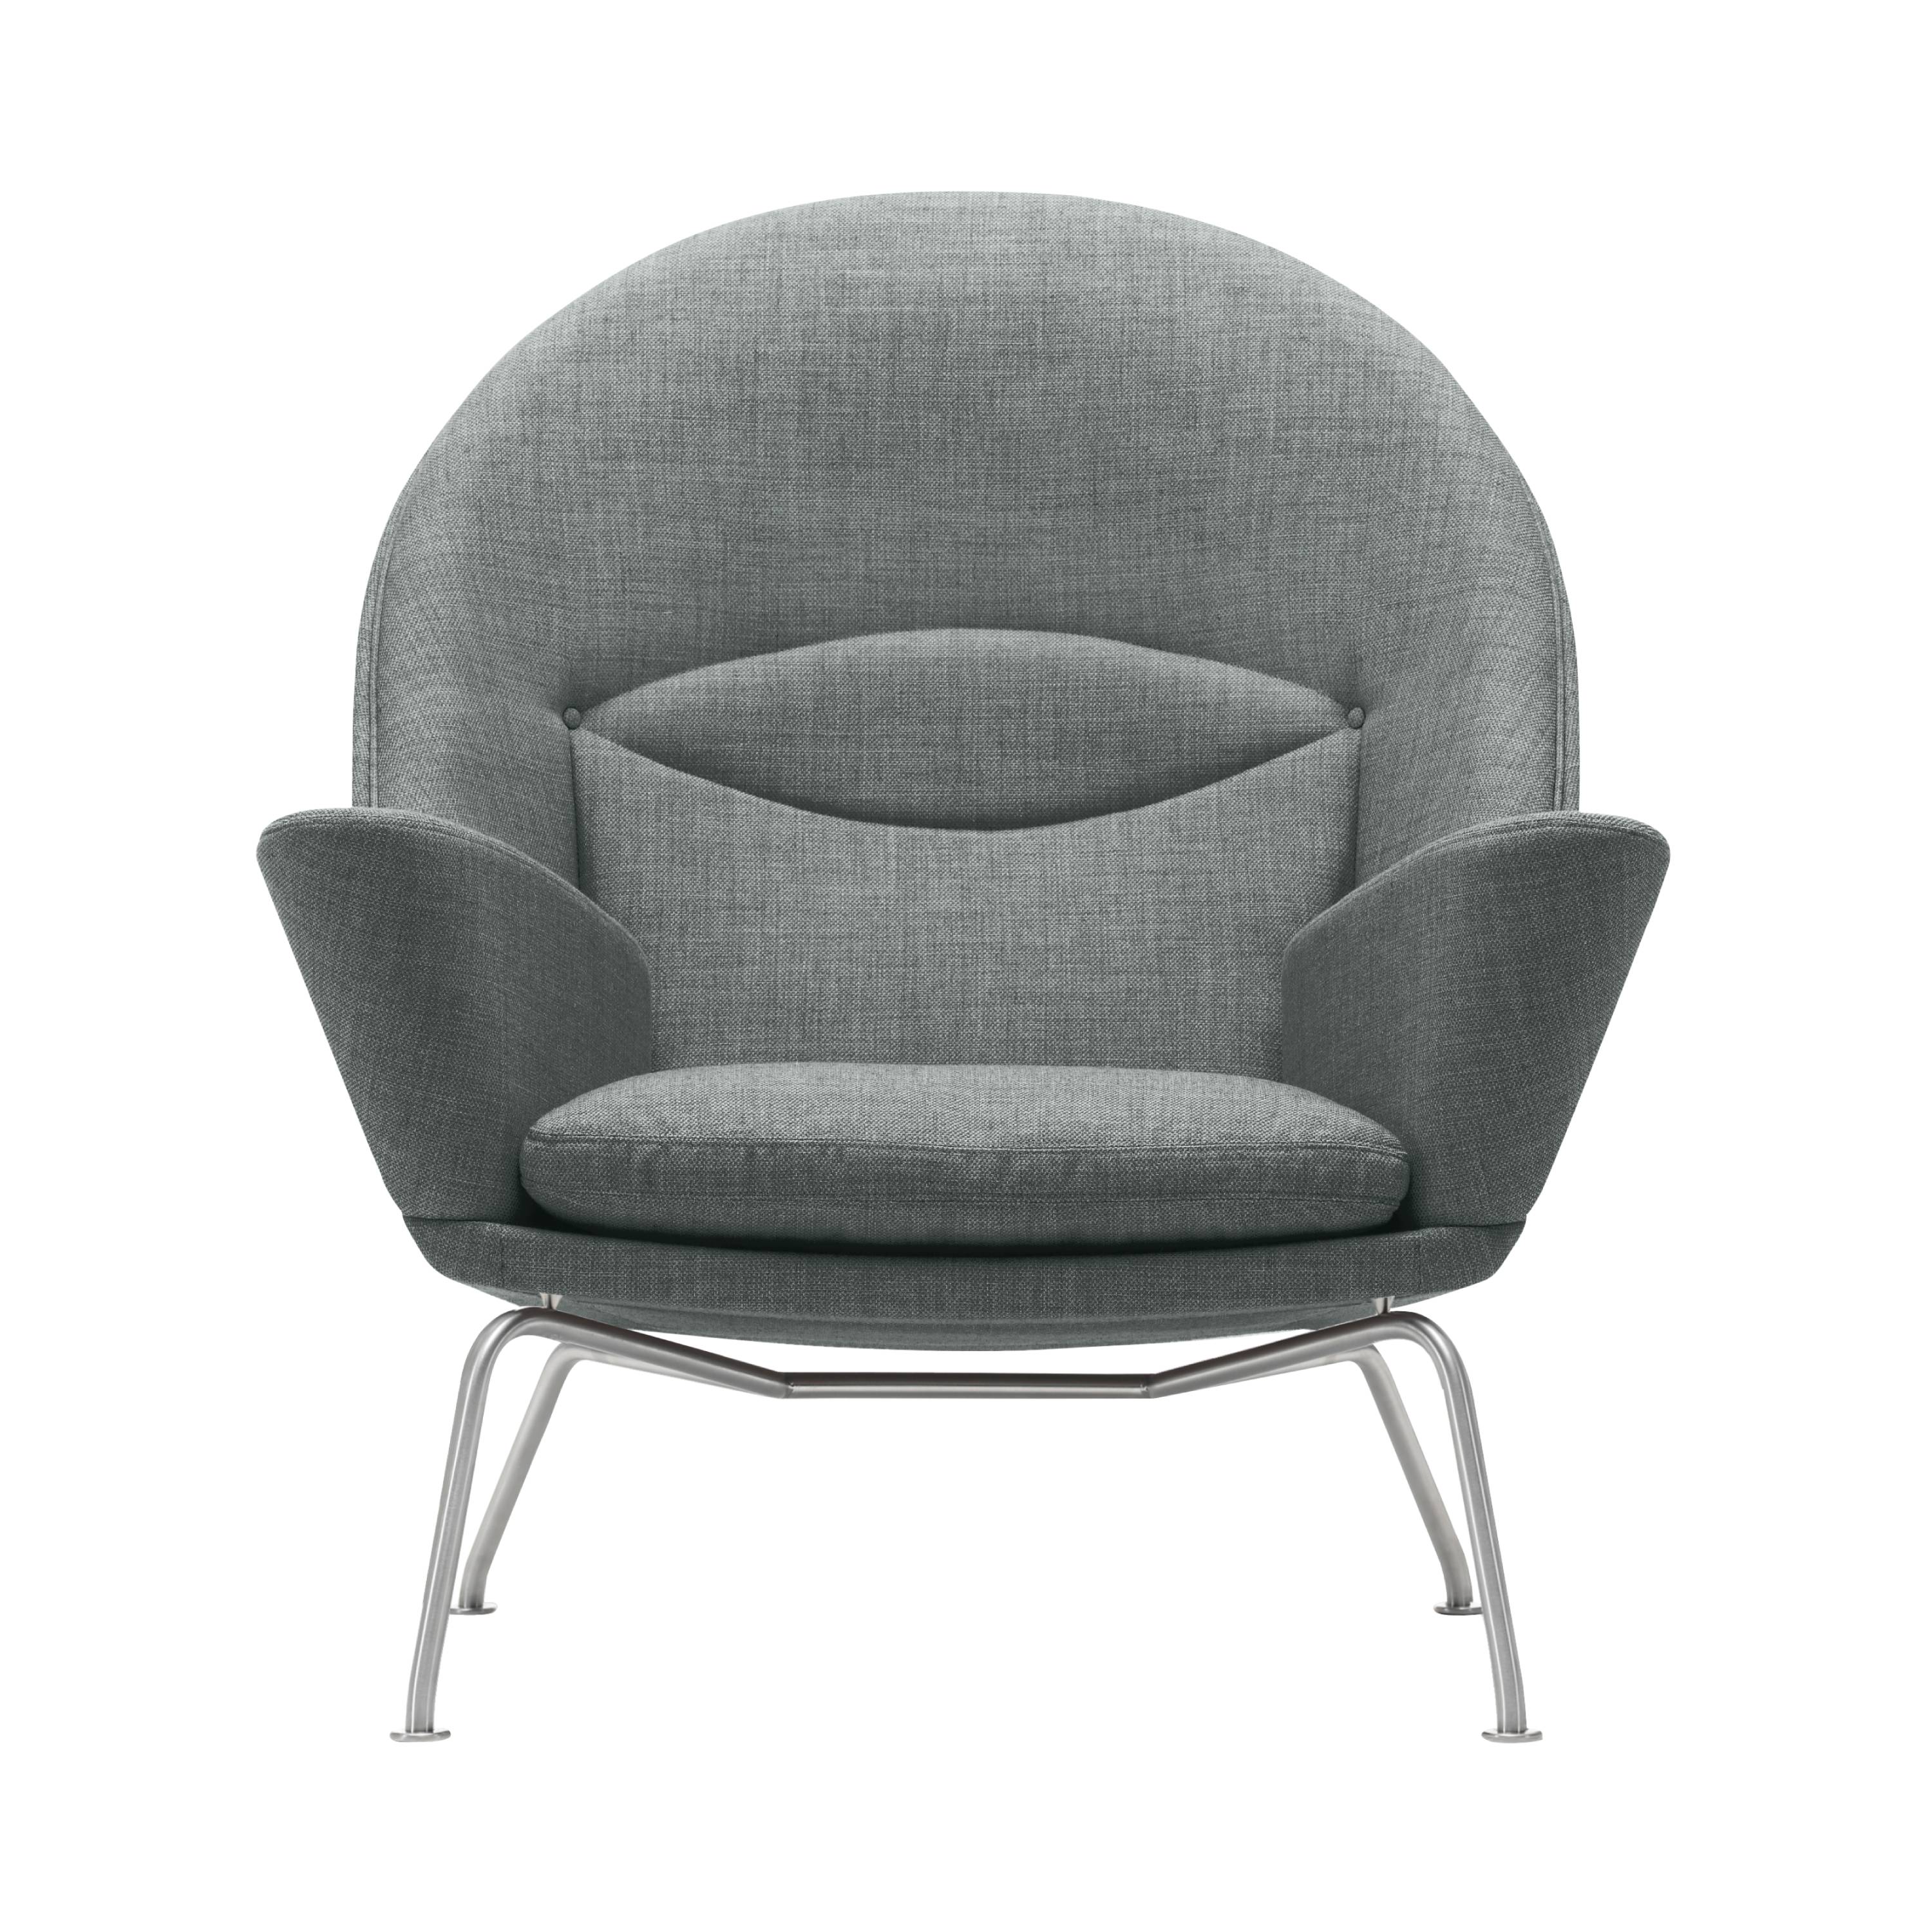 CH468 Oculus Chair: Without Footstool